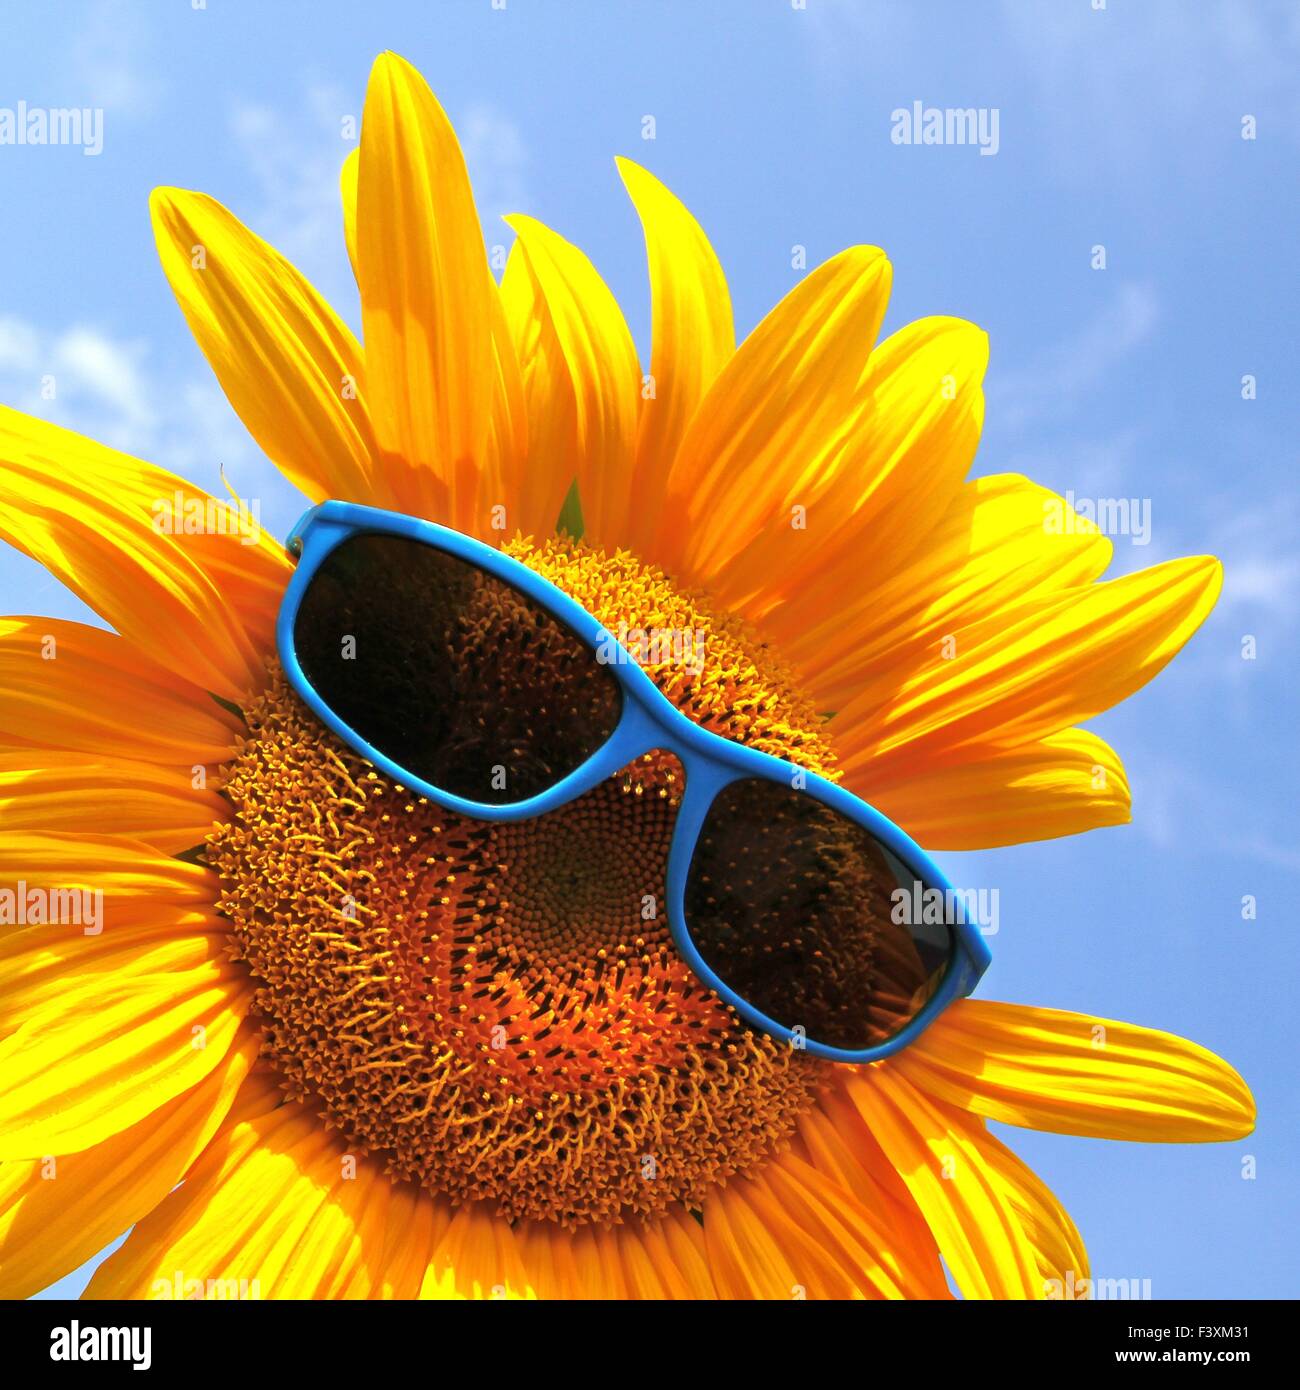 funny, yellow sunflower with sunglasses Stock Photo